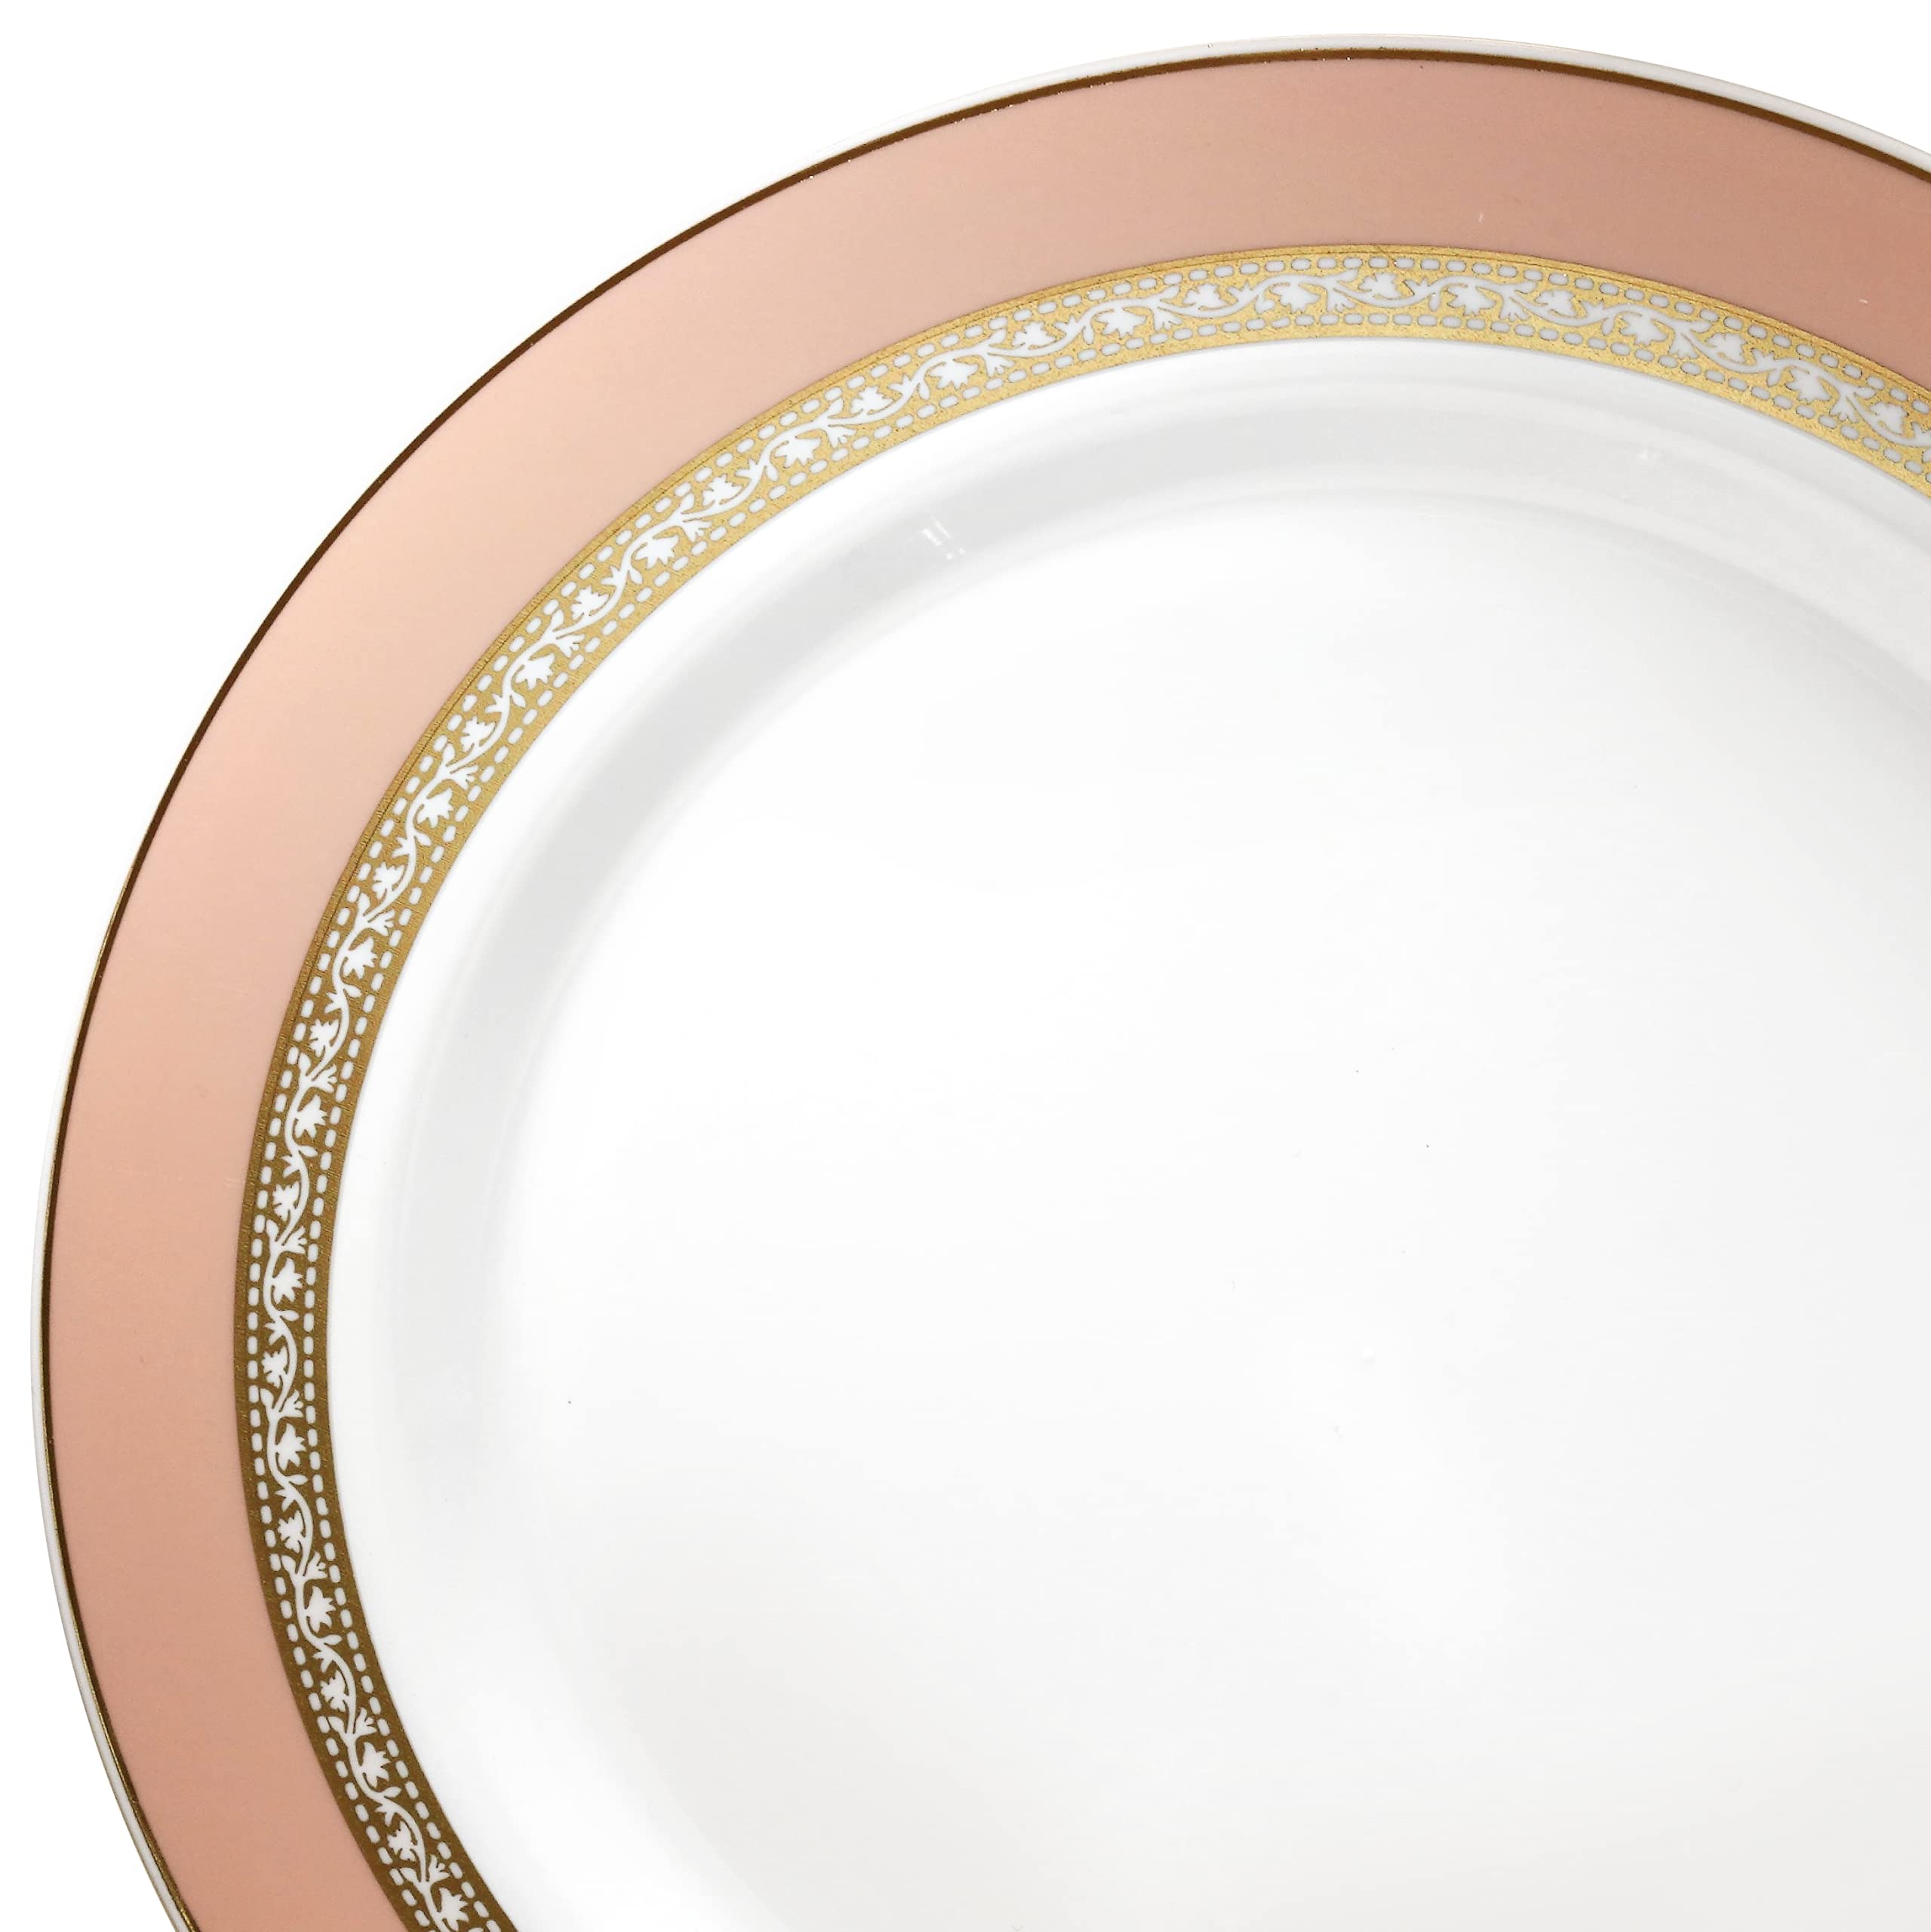 " OCCASIONS " 40 Piece Chargers pack Wedding Party 12'' Disposable Plastic Charger Plates/Chargers (Ritz Blush & Gold)